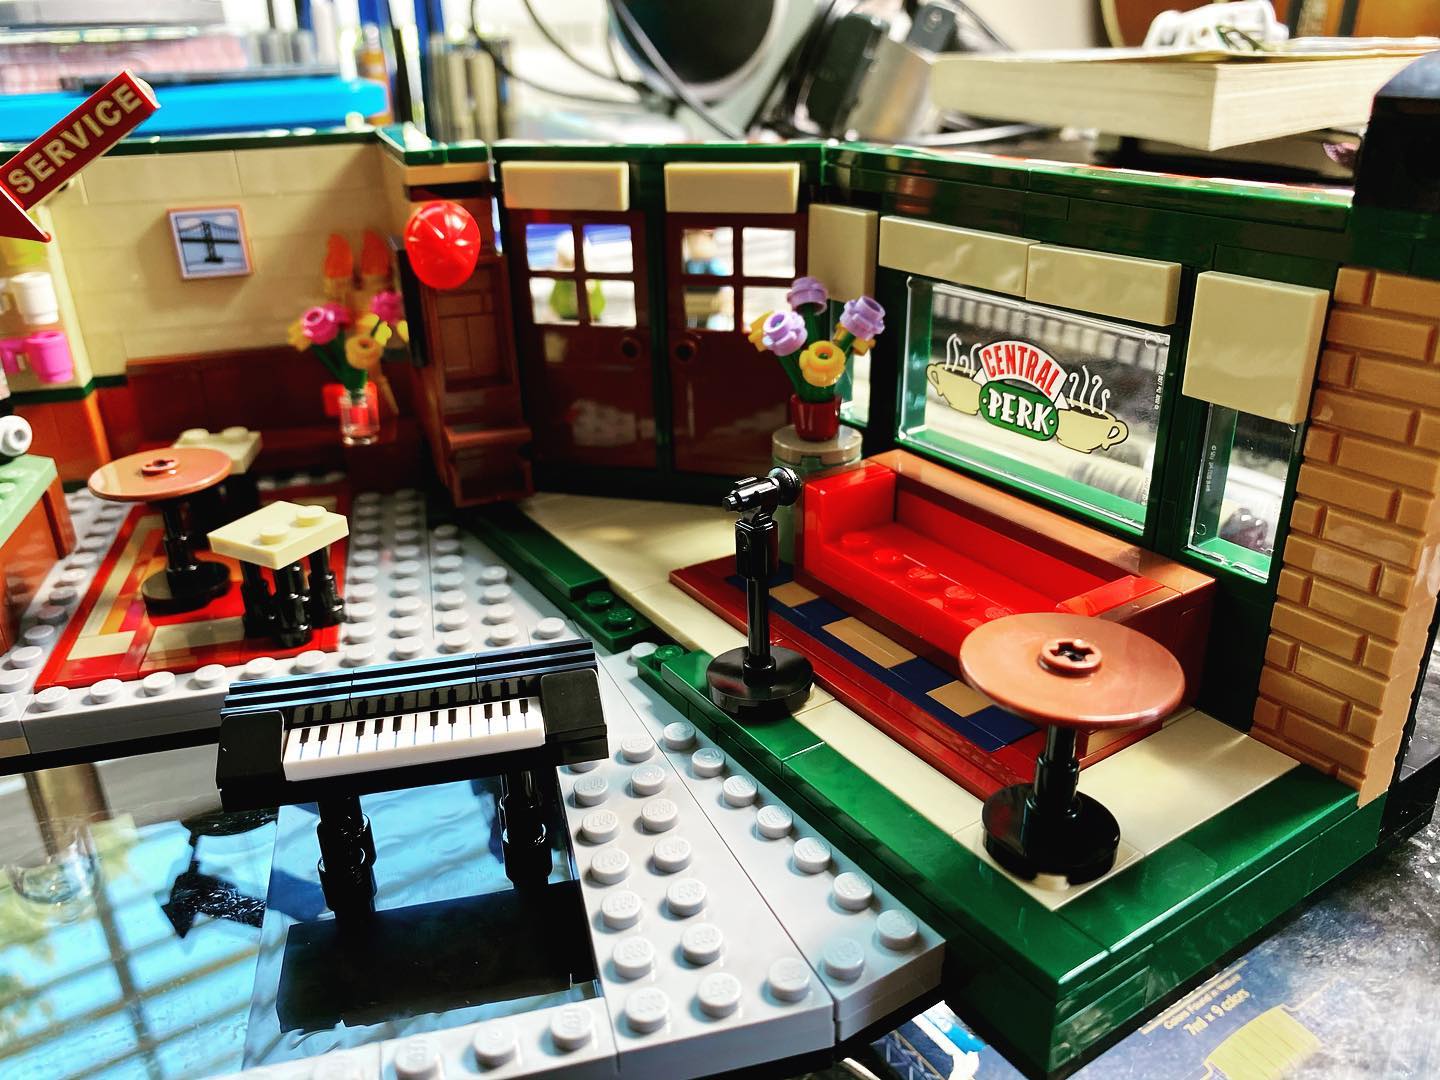 When you’re really missing live music played with real people. #legofriends #legogram